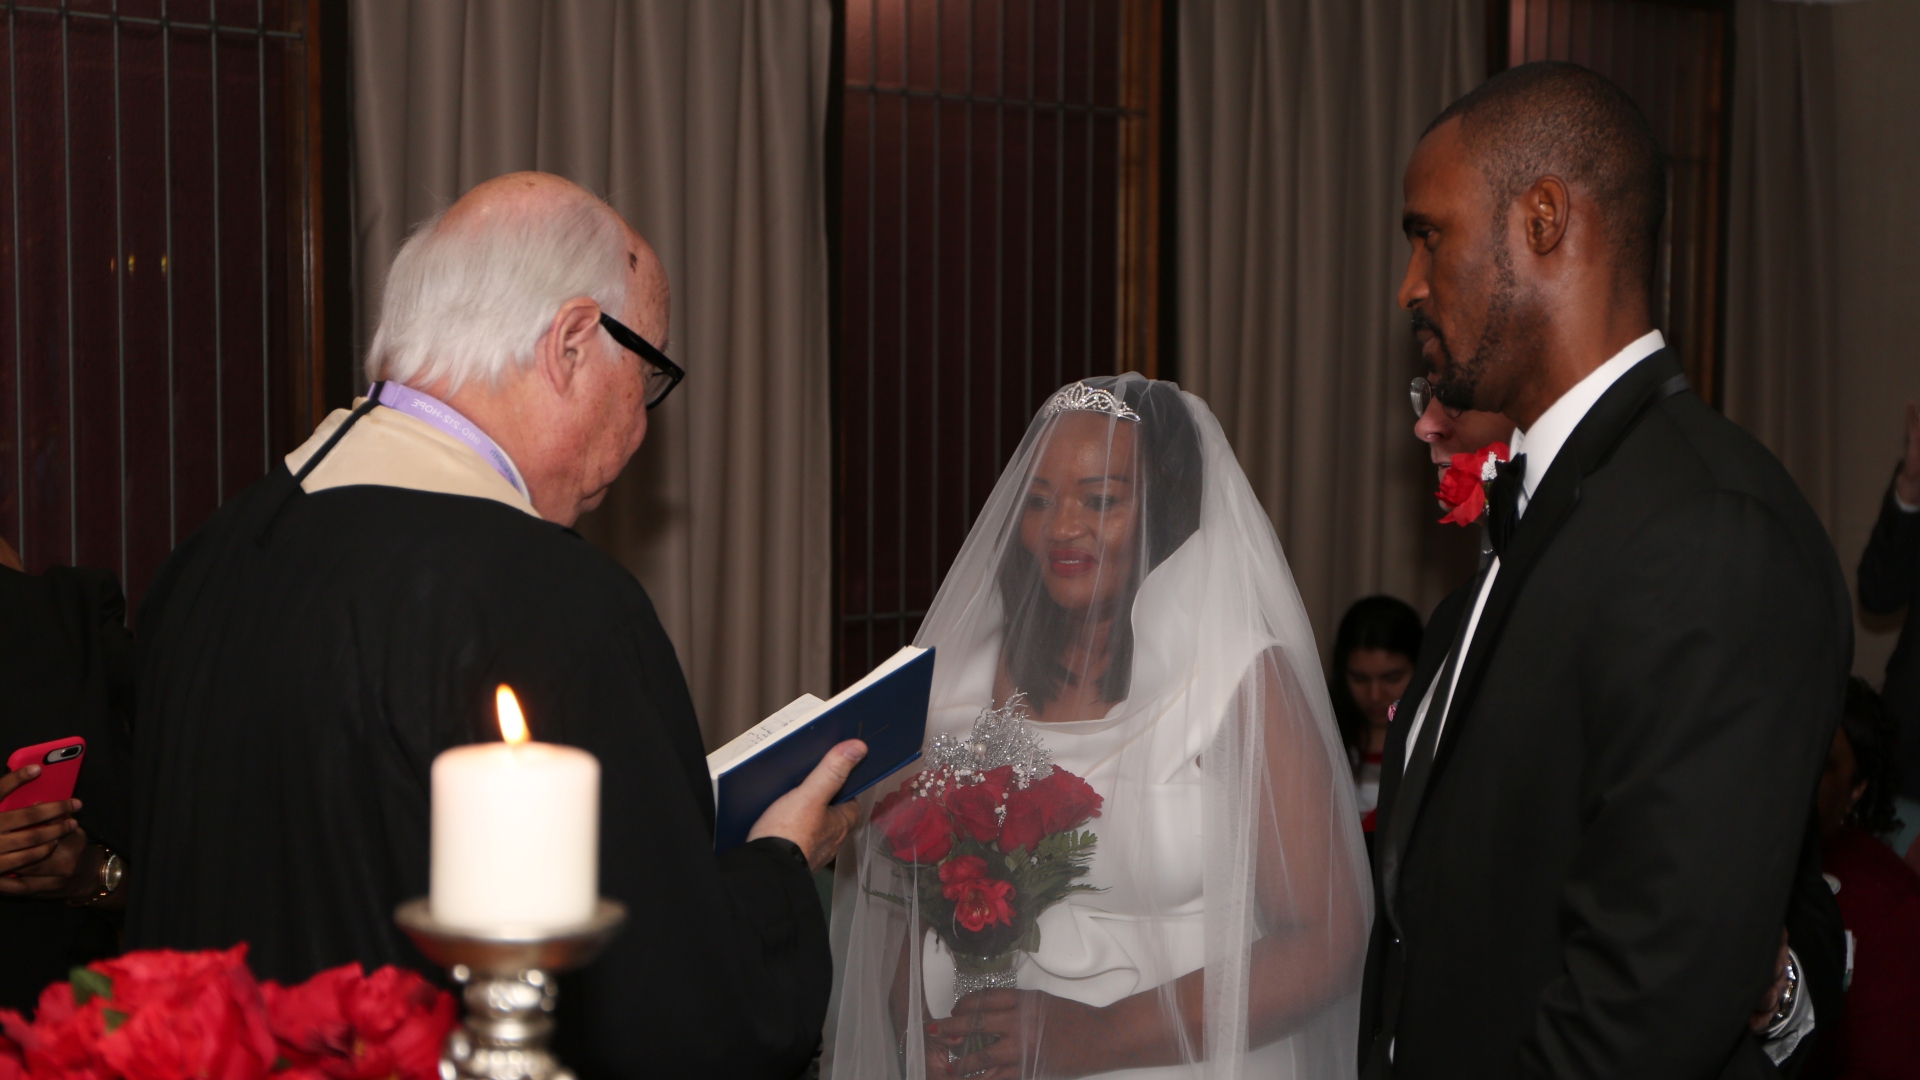 An Atrium Health teammate and her husband spent Valentine’s Day getting married in the chapel at Carolinas Medical Center, where she’s worked for the past 21 years.